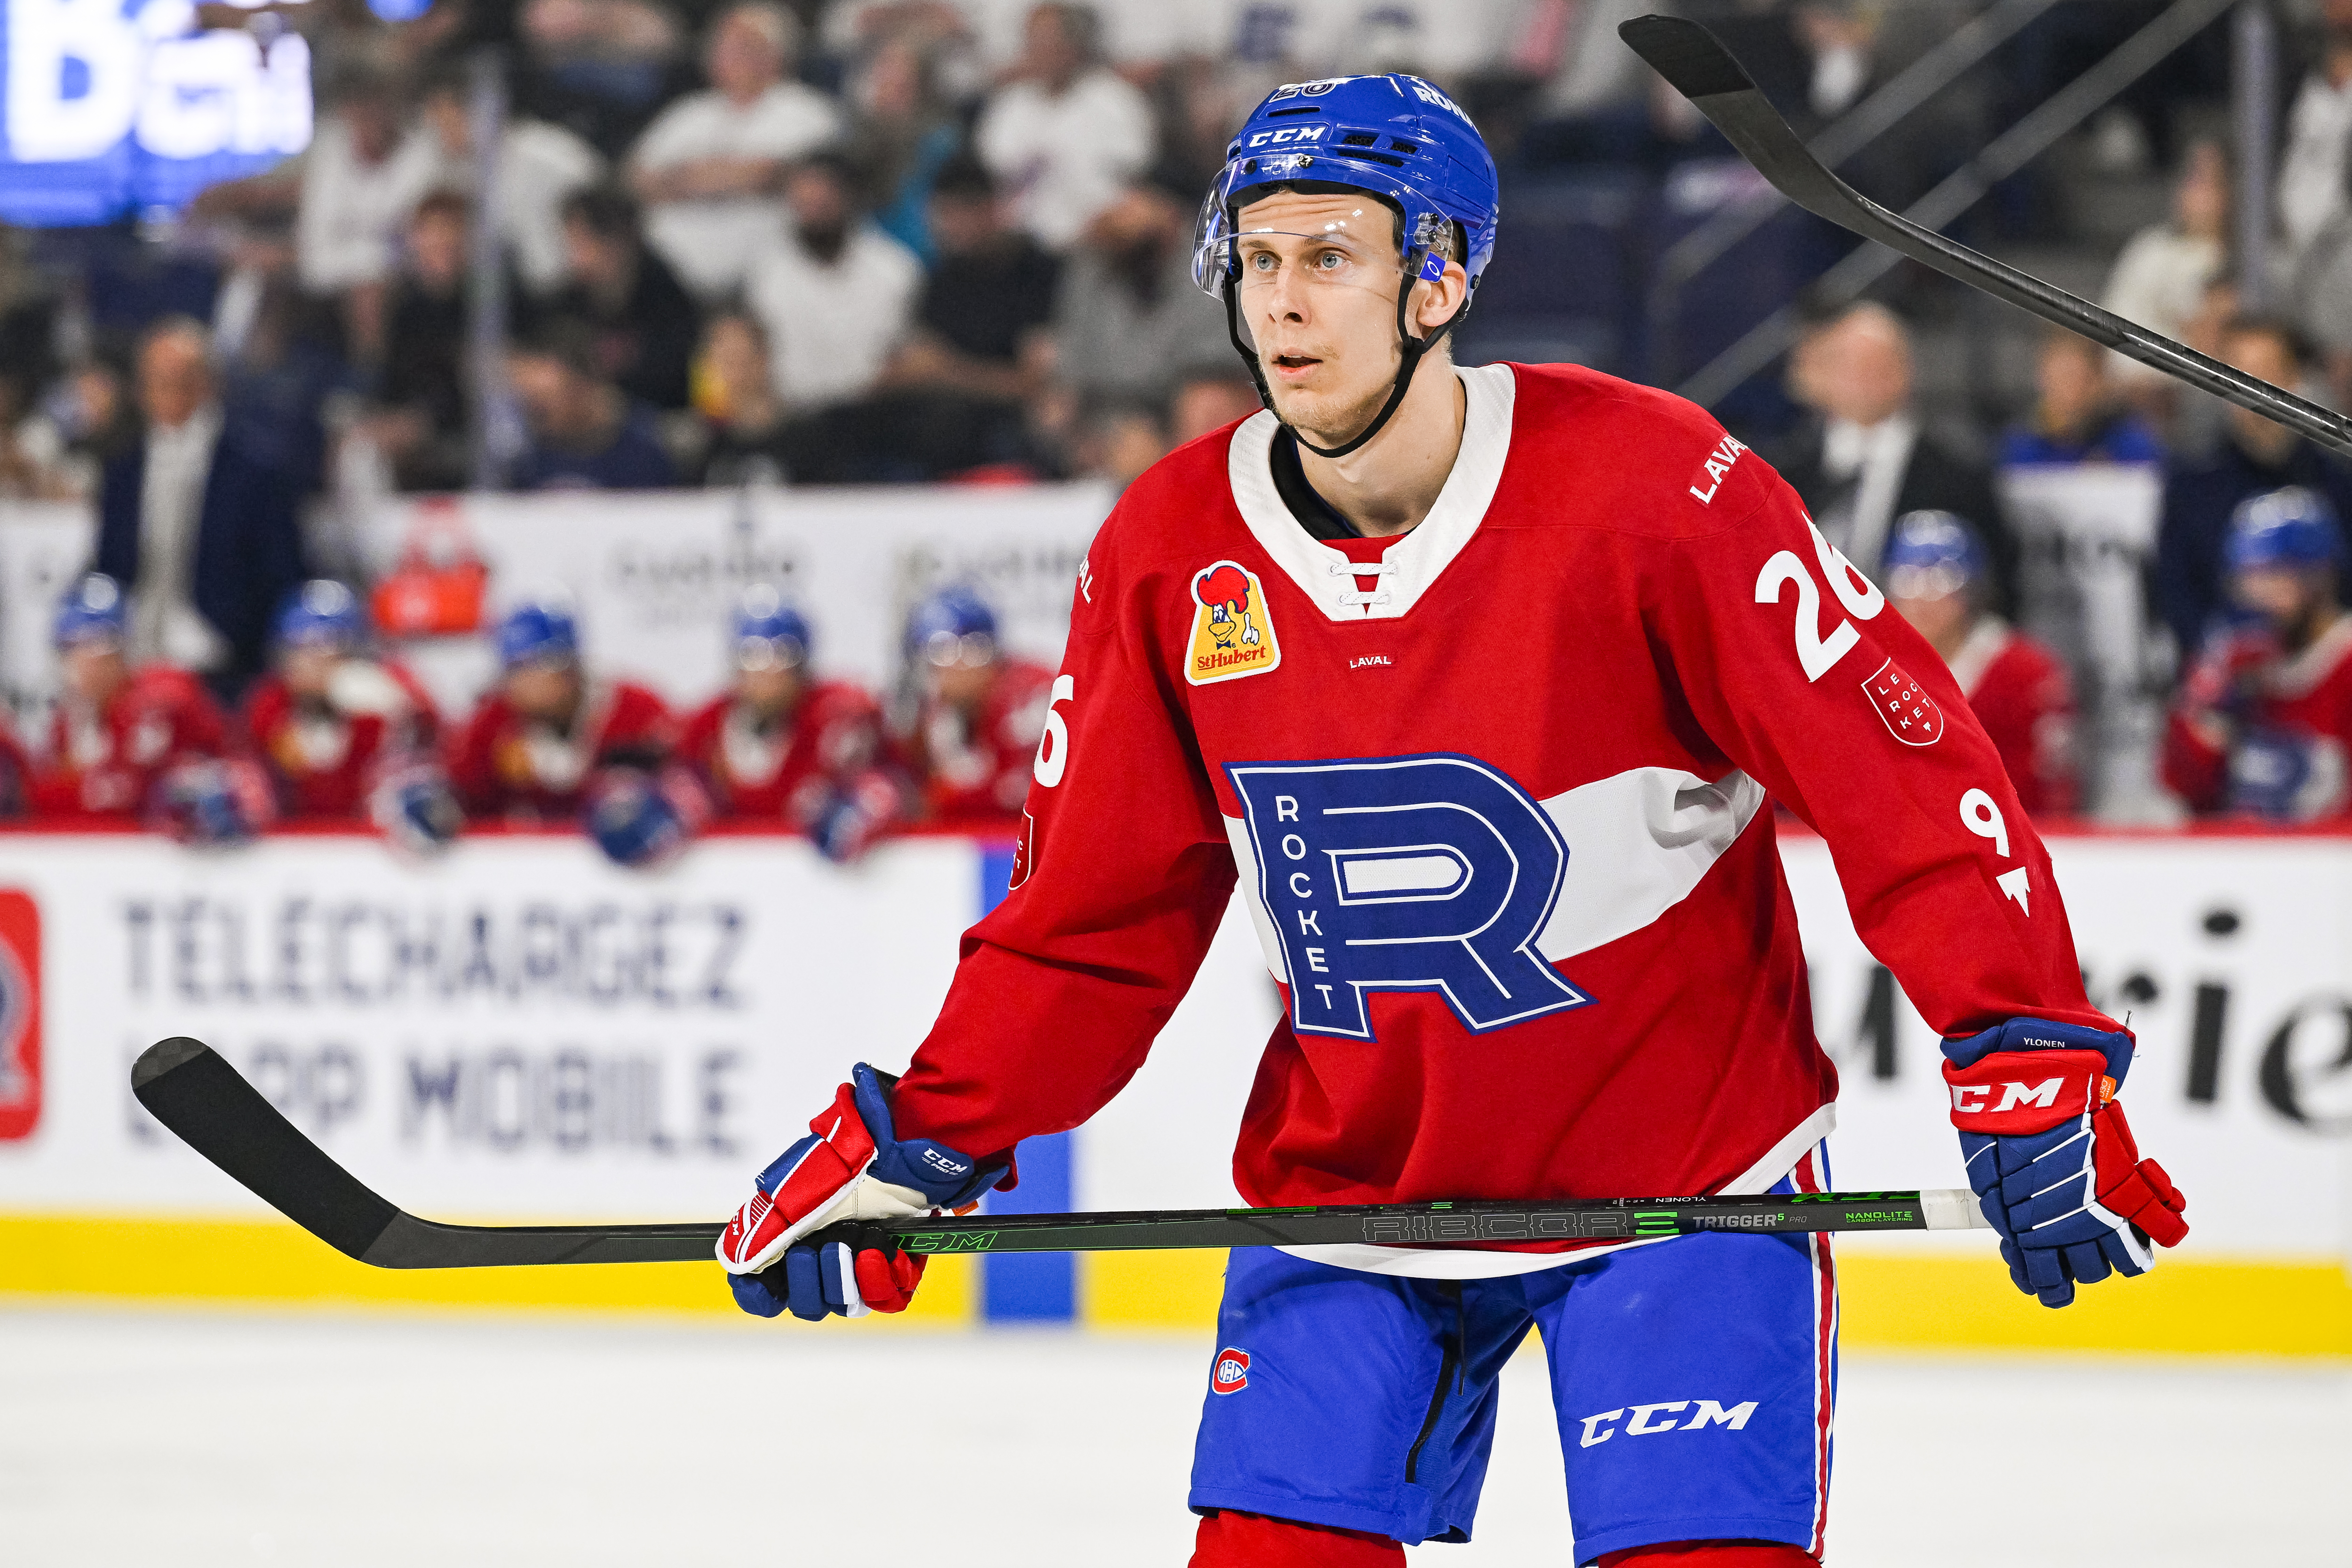 AHL: MAY 22 AHL Calder Cup Round 3 - Rochester Americans at Laval Rocket